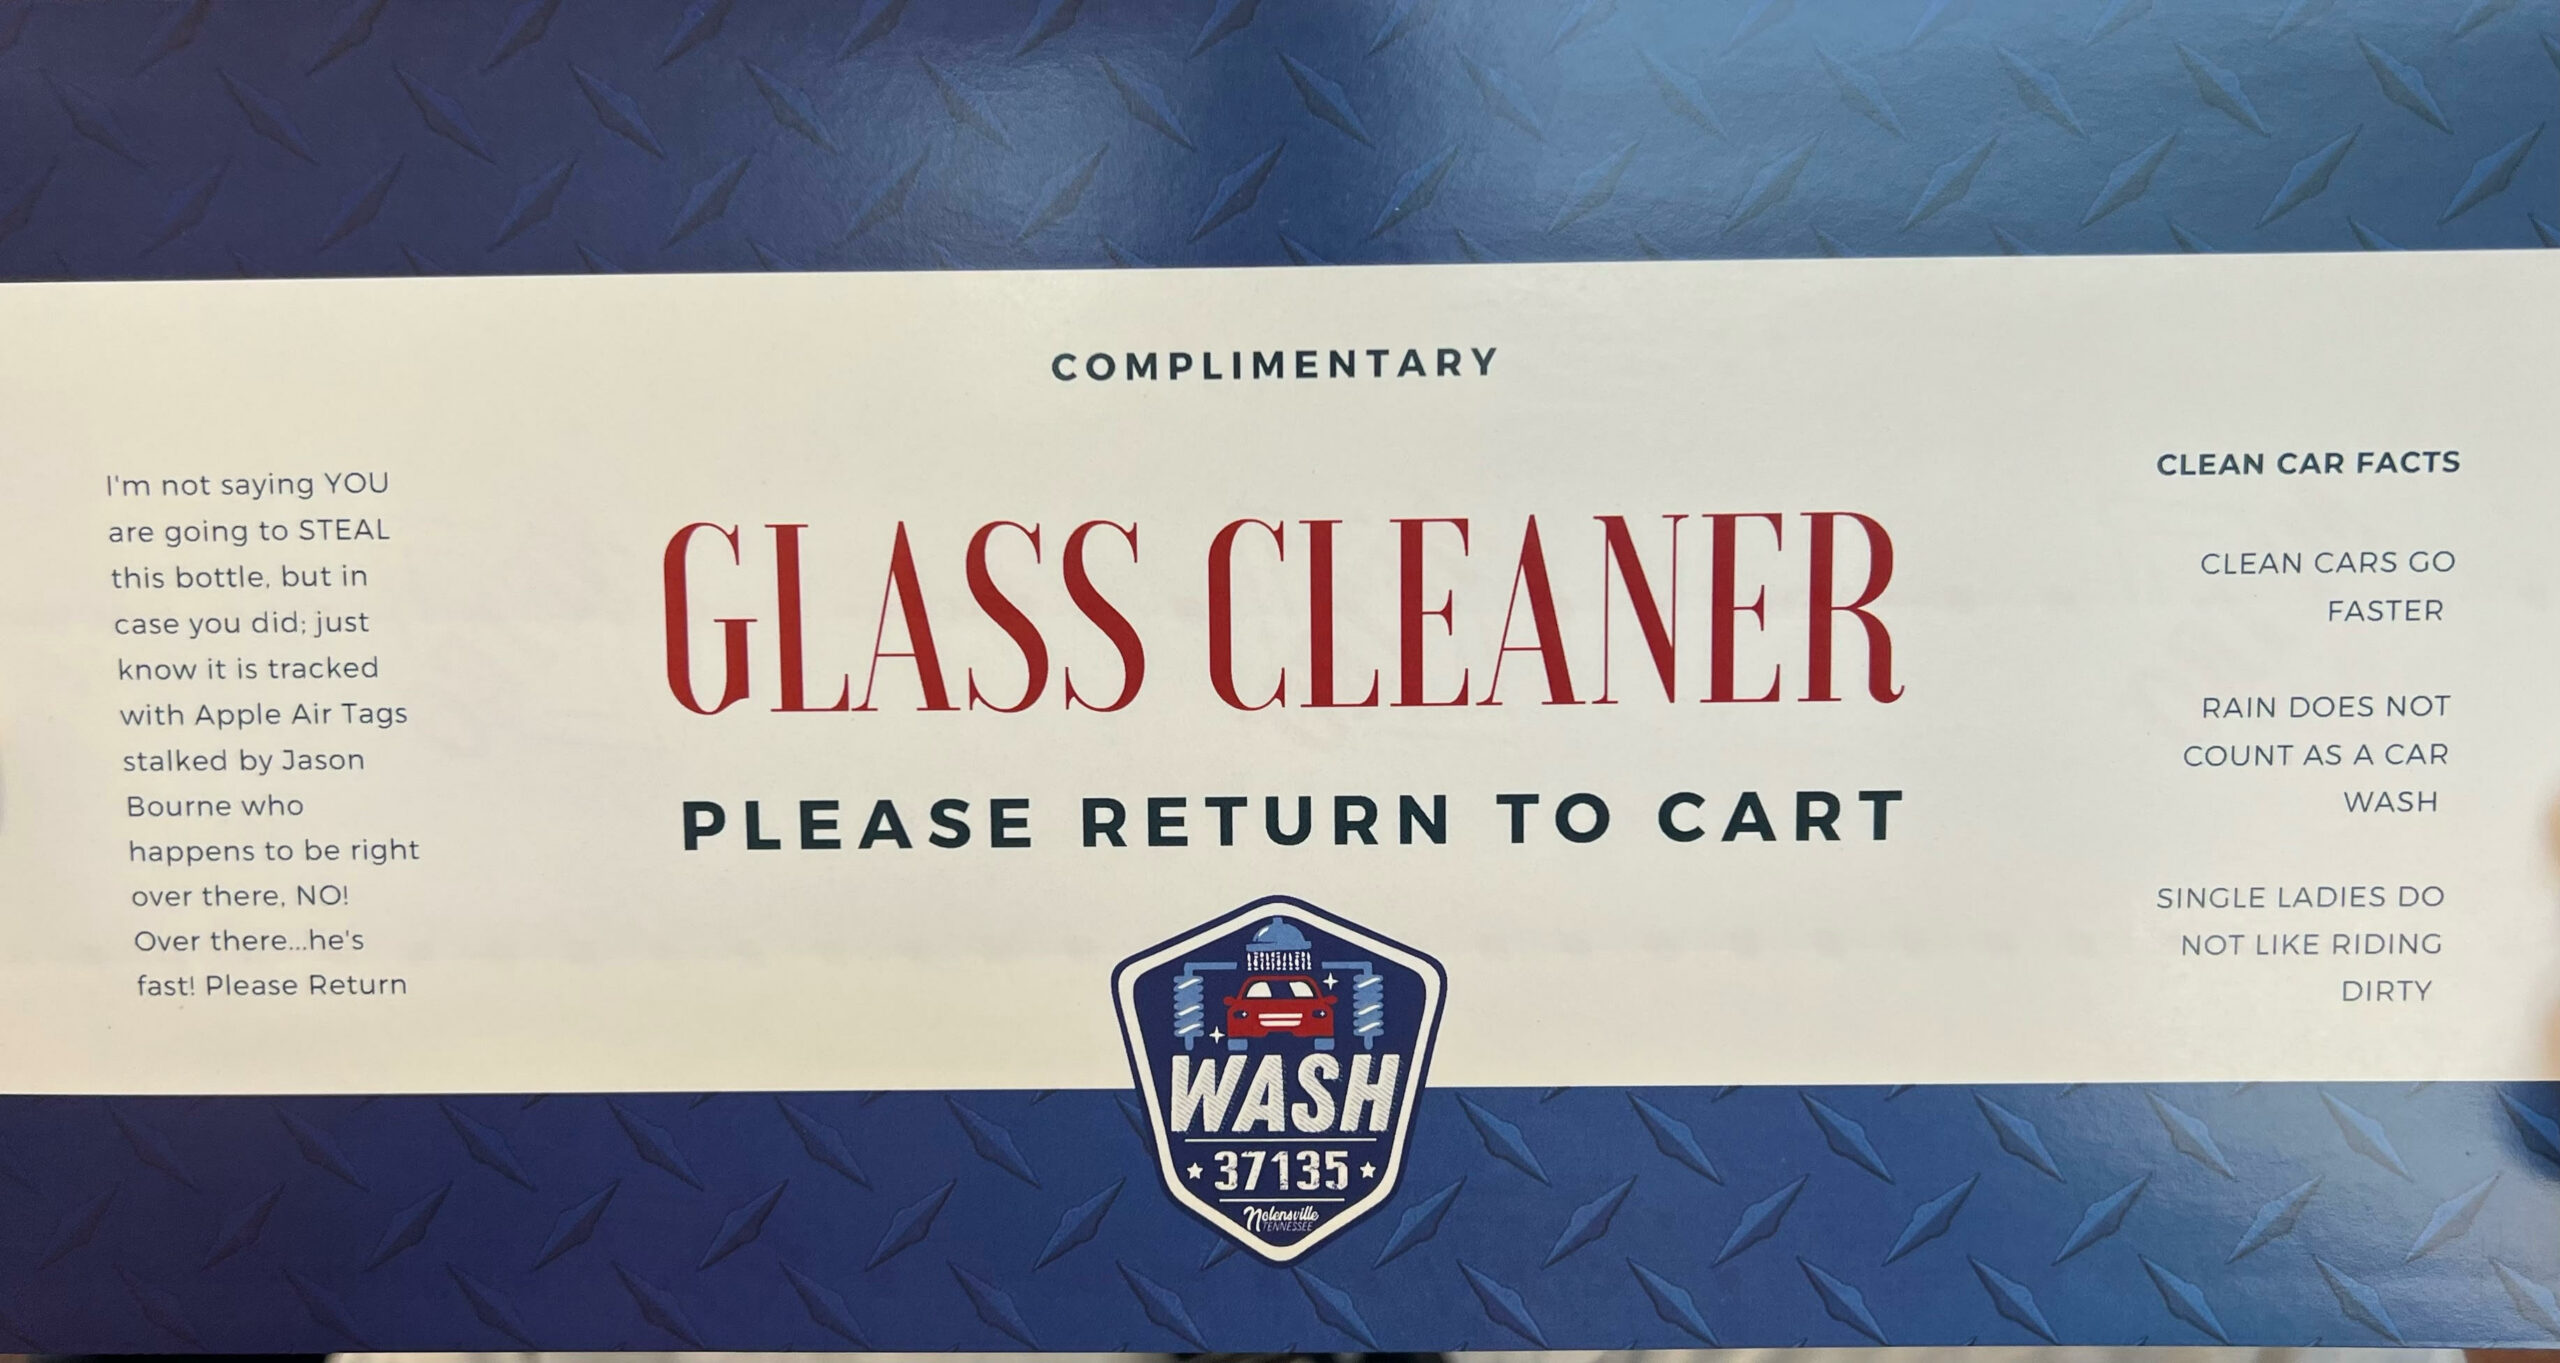 A car wash company updated the labels on its glass cleaner bottles to prevent theft.